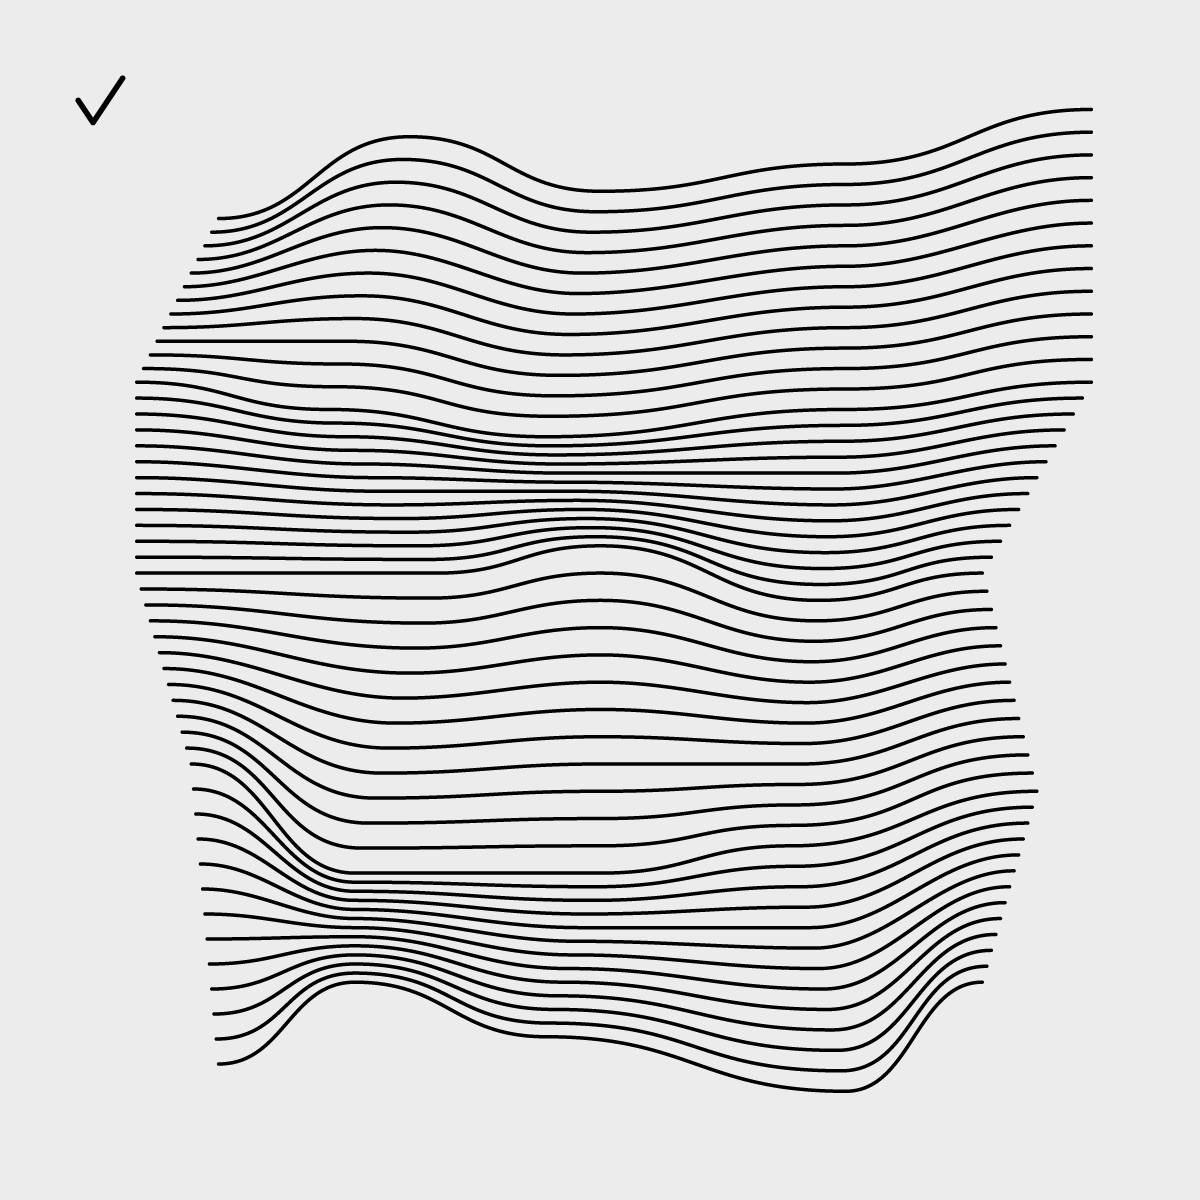 A form made of curved horizontal lines whose contrast and contours are balanced